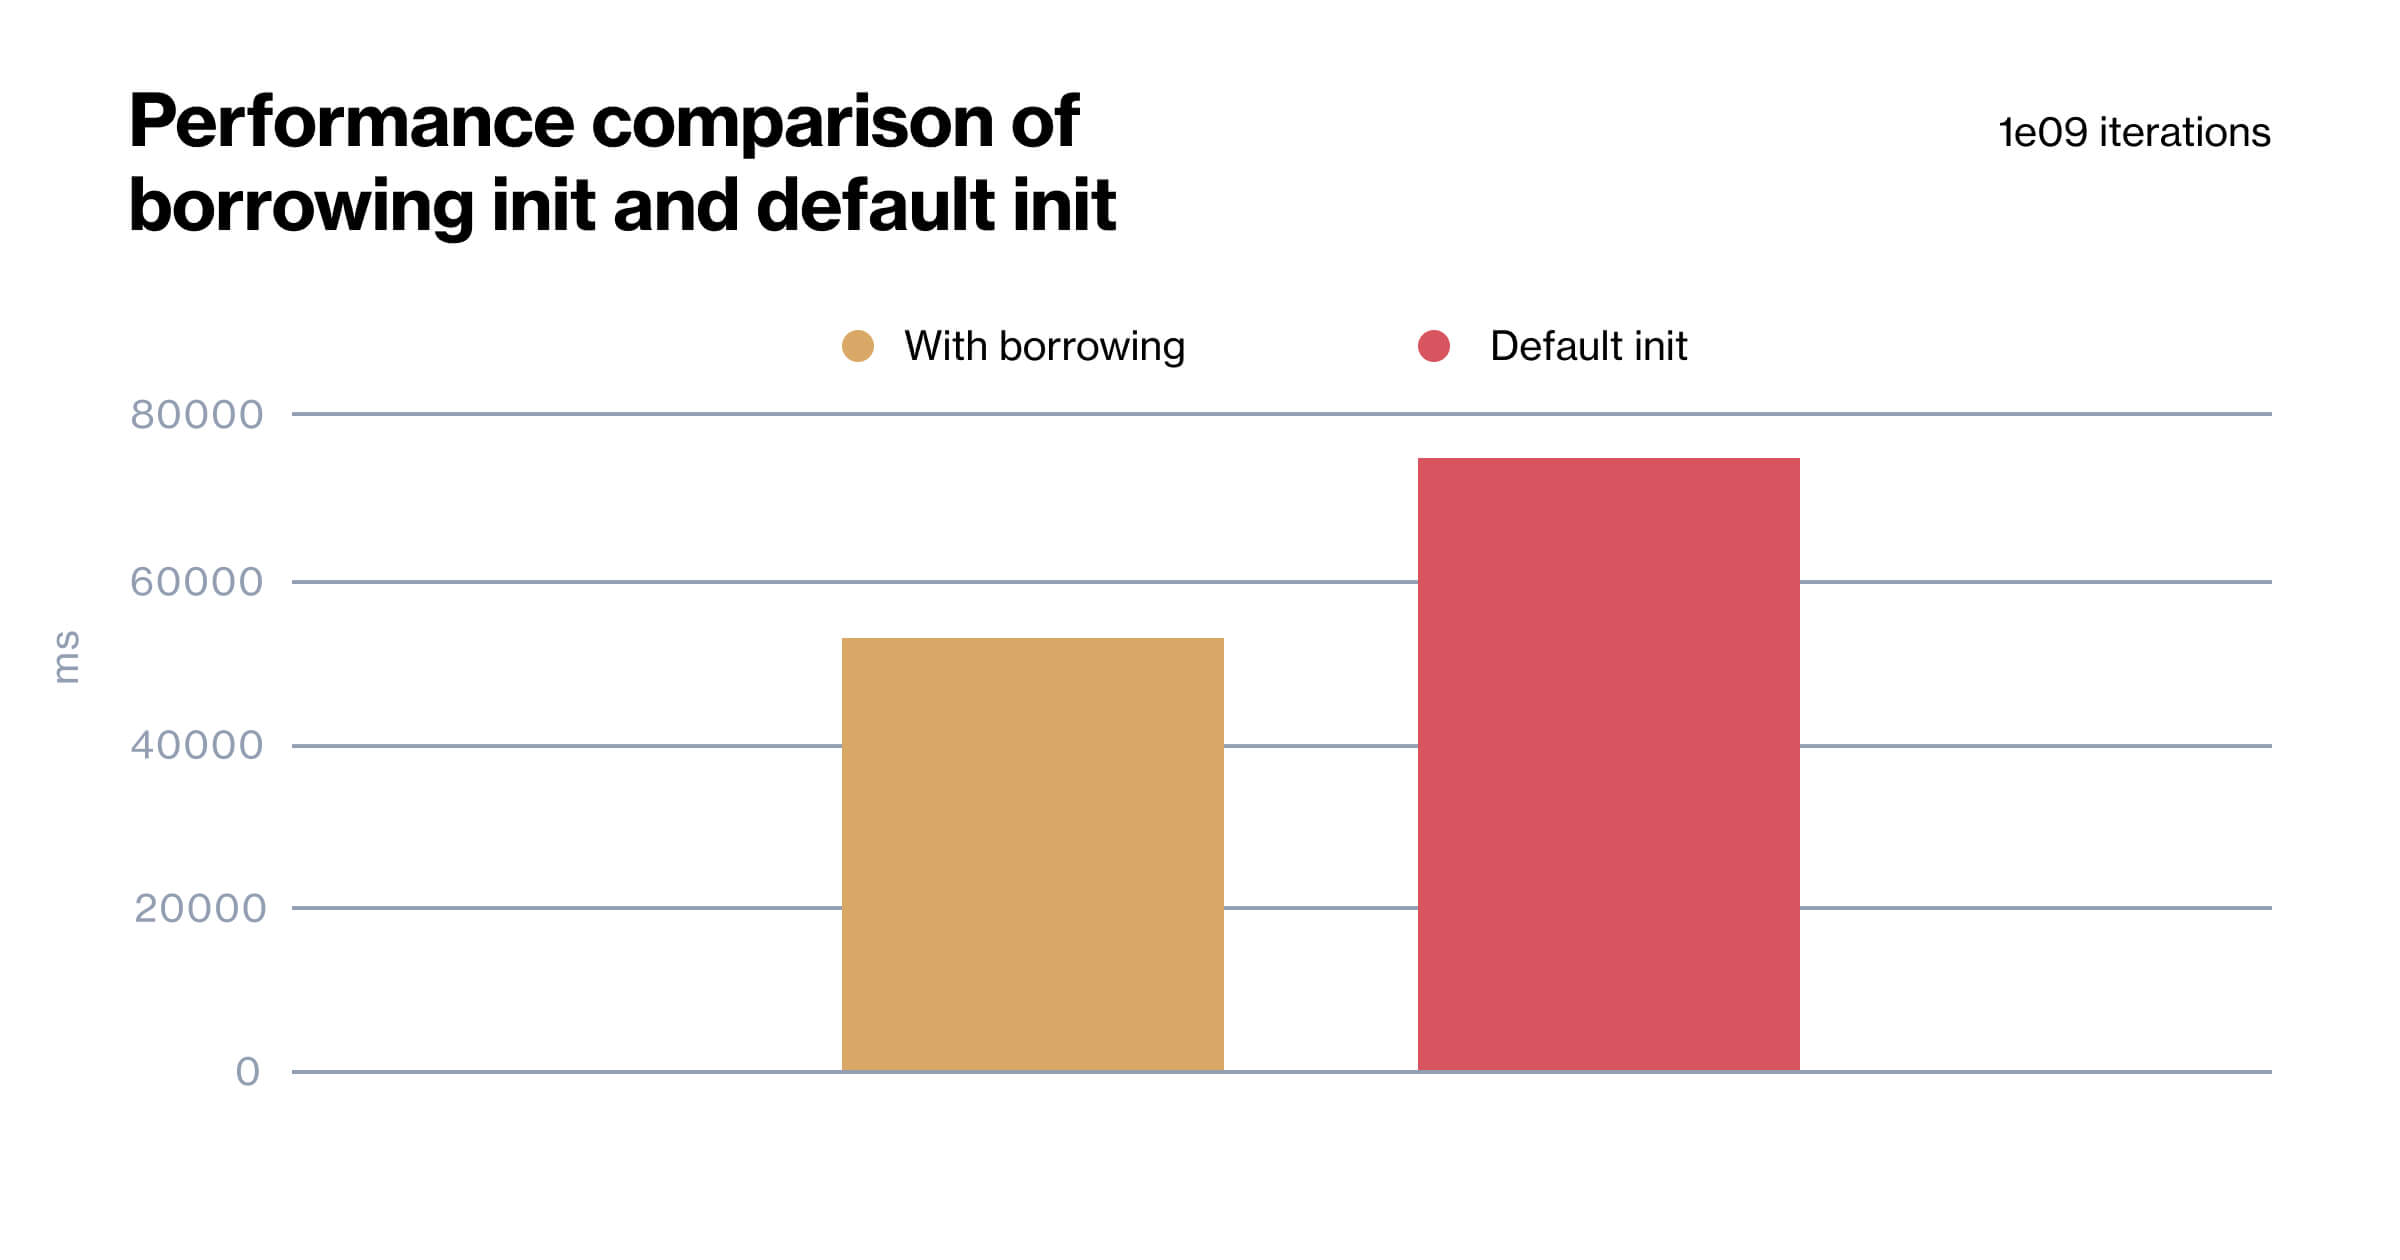 Borrowing init and default init performance compared in a chart.